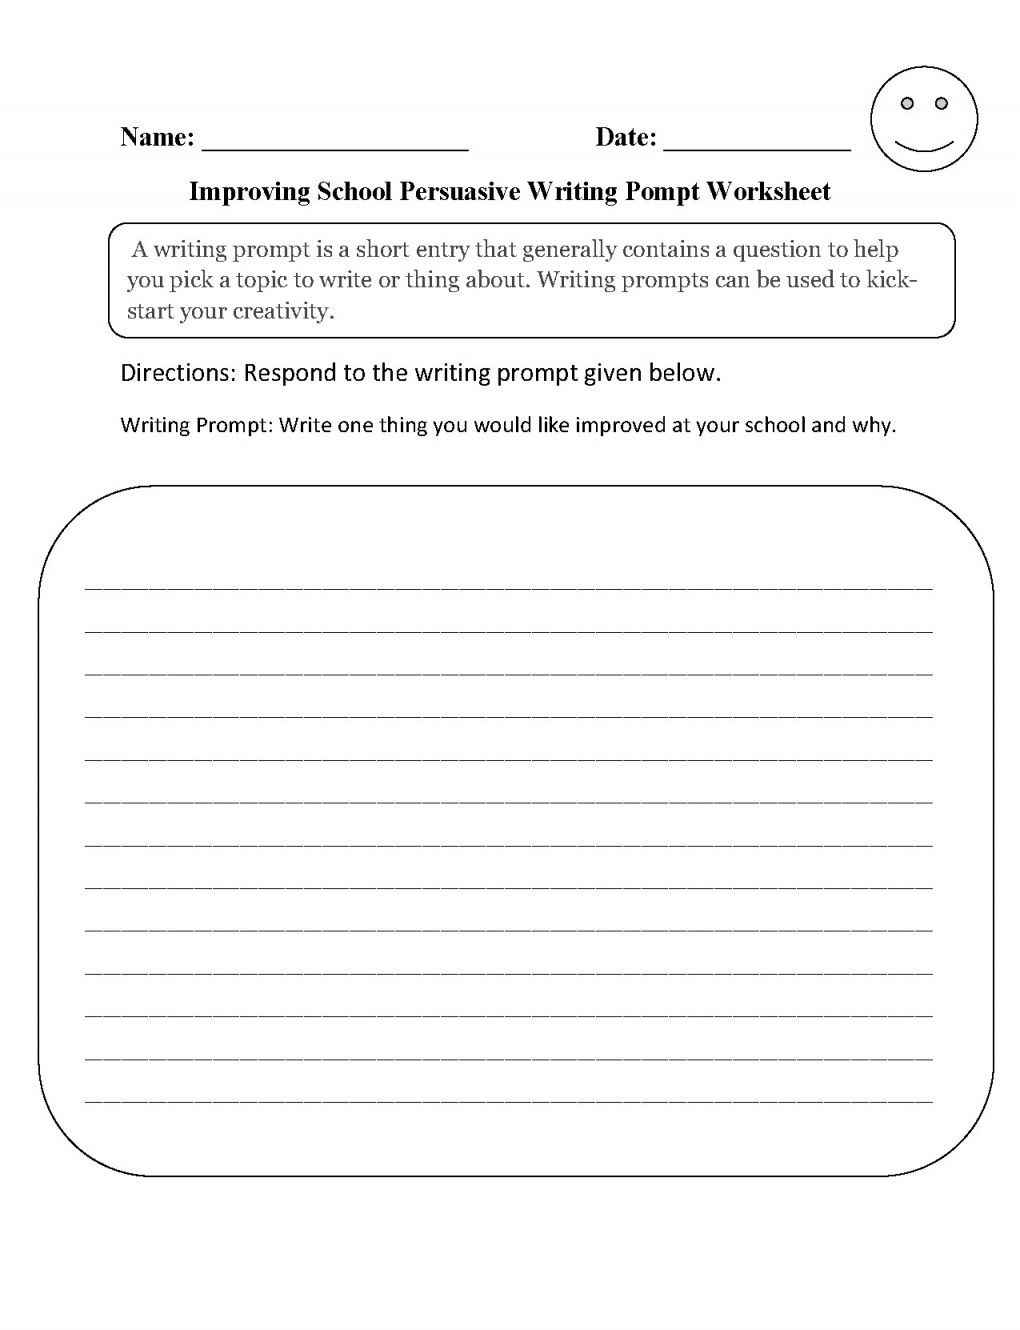 25rd Grade Writing Worksheets - Best Coloring Pages For Kids With Third Grade Writing Worksheet